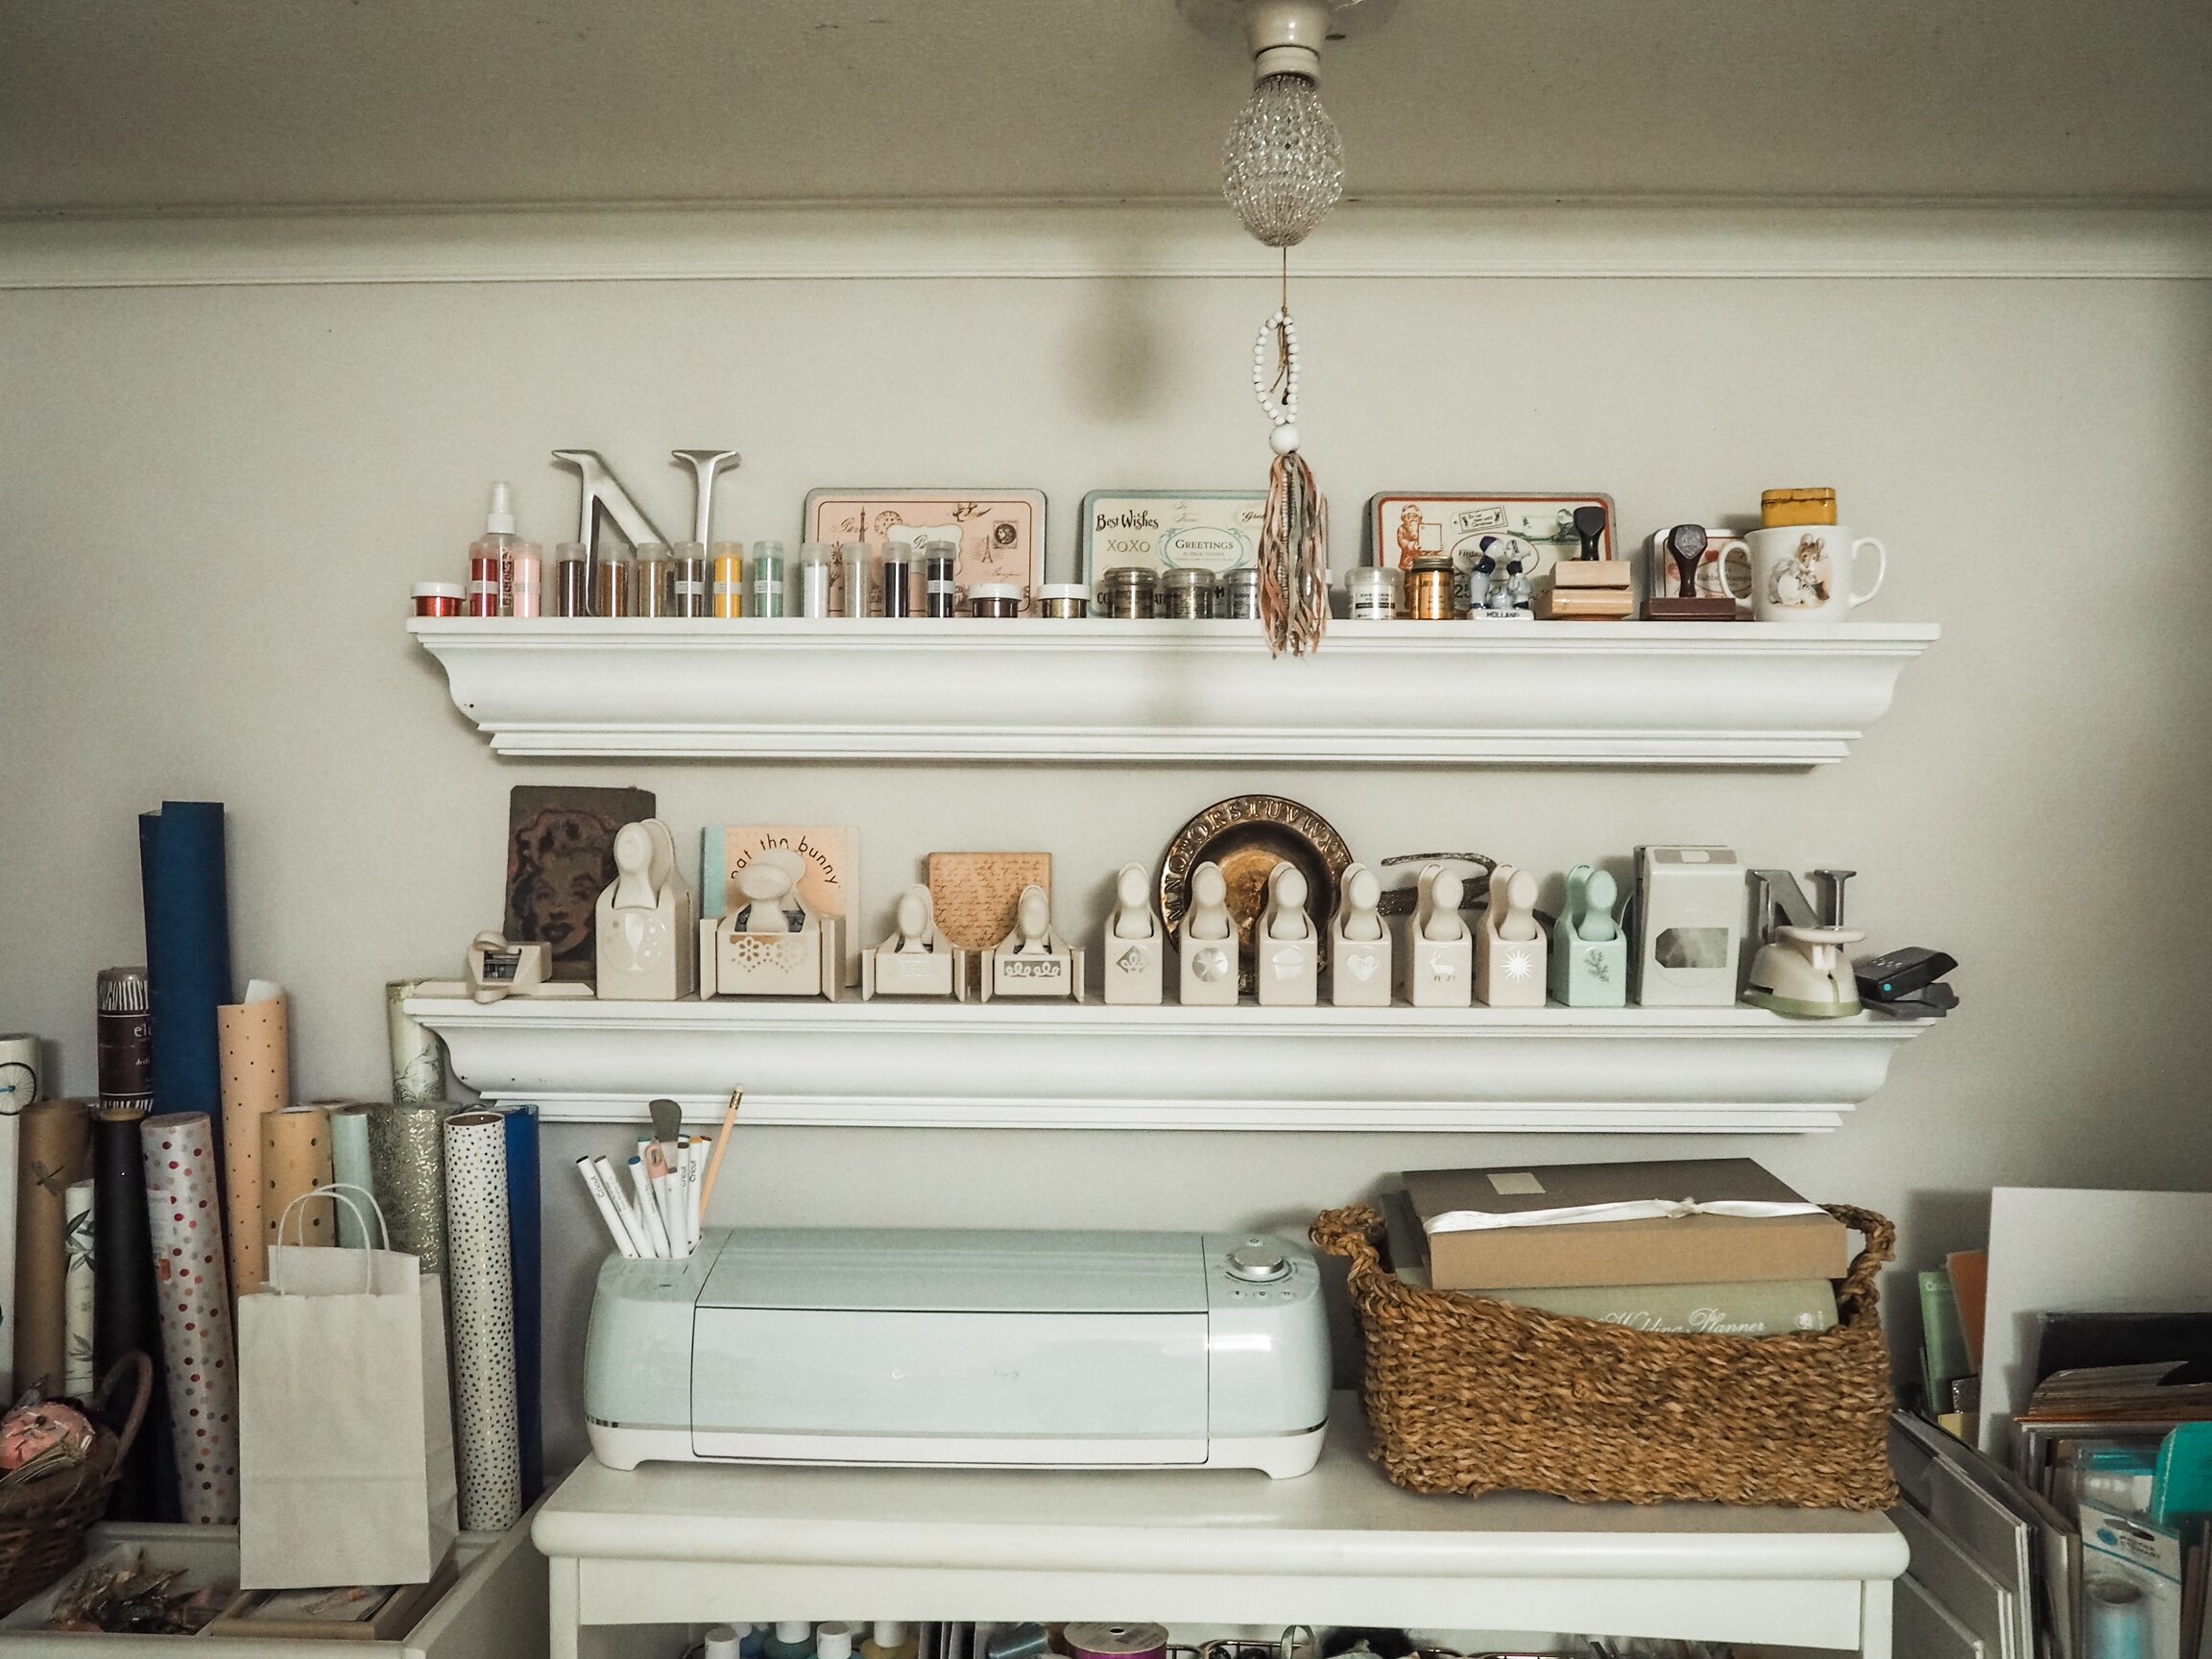 Photo shelves serve as display and open storage for embossing powders, stamps and decorative punches.